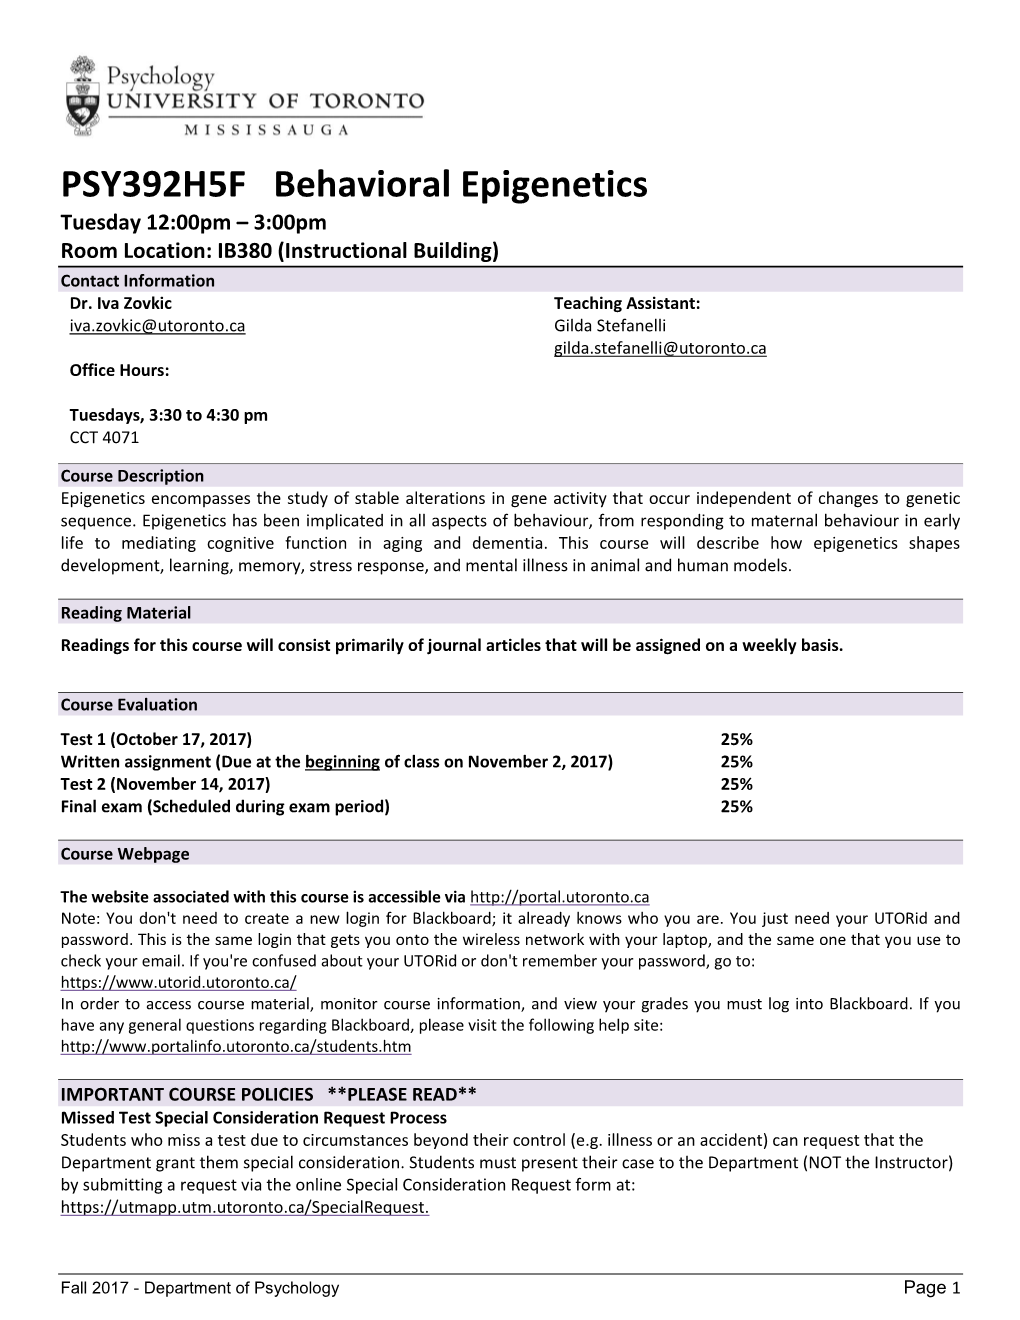 PSY392H5F Behavioral Epigenetics Tuesday 12:00Pm – 3:00Pm Room Location: IB380 (Instructional Building) Contact Information Dr